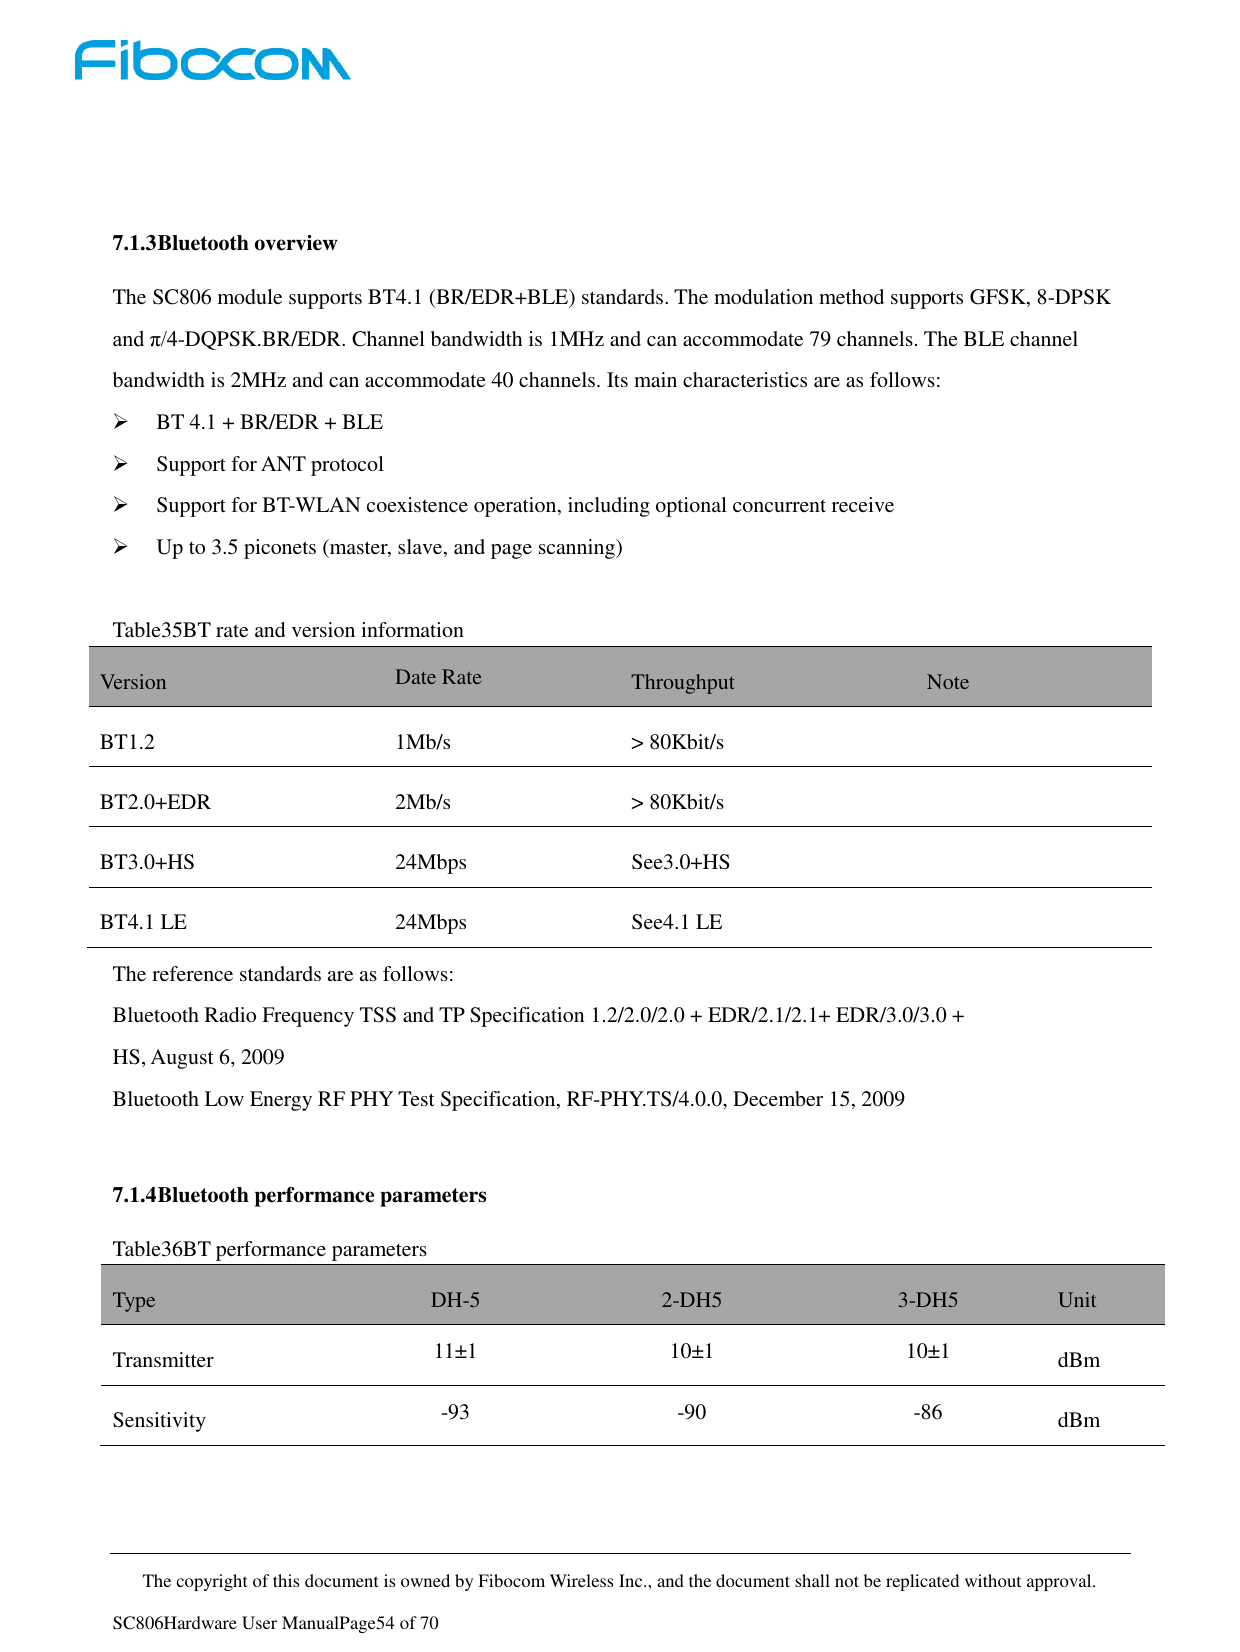     The copyright of this document is owned by Fibocom Wireless Inc., and the document shall not be replicated without approval.   SC806Hardware User ManualPage54 of 70   7.1.3 Bluetooth overview The SC806 module supports BT4.1 (BR/EDR+BLE) standards. The modulation method supports GFSK, 8-DPSK and π/4-DQPSK.BR/EDR. Channel bandwidth is 1MHz and can accommodate 79 channels. The BLE channel bandwidth is 2MHz and can accommodate 40 channels. Its main characteristics are as follows: ➢ BT 4.1 + BR/EDR + BLE ➢ Support for ANT protocol ➢ Support for BT-WLAN coexistence operation, including optional concurrent receive ➢ Up to 3.5 piconets (master, slave, and page scanning)  Table35BT rate and version information Version Date Rate Throughput Note BT1.2 1Mb/s &gt; 80Kbit/s  BT2.0+EDR 2Mb/s &gt; 80Kbit/s  BT3.0+HS 24Mbps See3.0+HS  BT4.1 LE 24Mbps See4.1 LE  The reference standards are as follows: Bluetooth Radio Frequency TSS and TP Specification 1.2/2.0/2.0 + EDR/2.1/2.1+ EDR/3.0/3.0 + HS, August 6, 2009 Bluetooth Low Energy RF PHY Test Specification, RF-PHY.TS/4.0.0, December 15, 2009  7.1.4 Bluetooth performance parameters Table36BT performance parameters Type DH-5 2-DH5 3-DH5 Unit Transmitter 11±1 10±1 10±1 dBm Sensitivity -93 -90 -86 dBm   